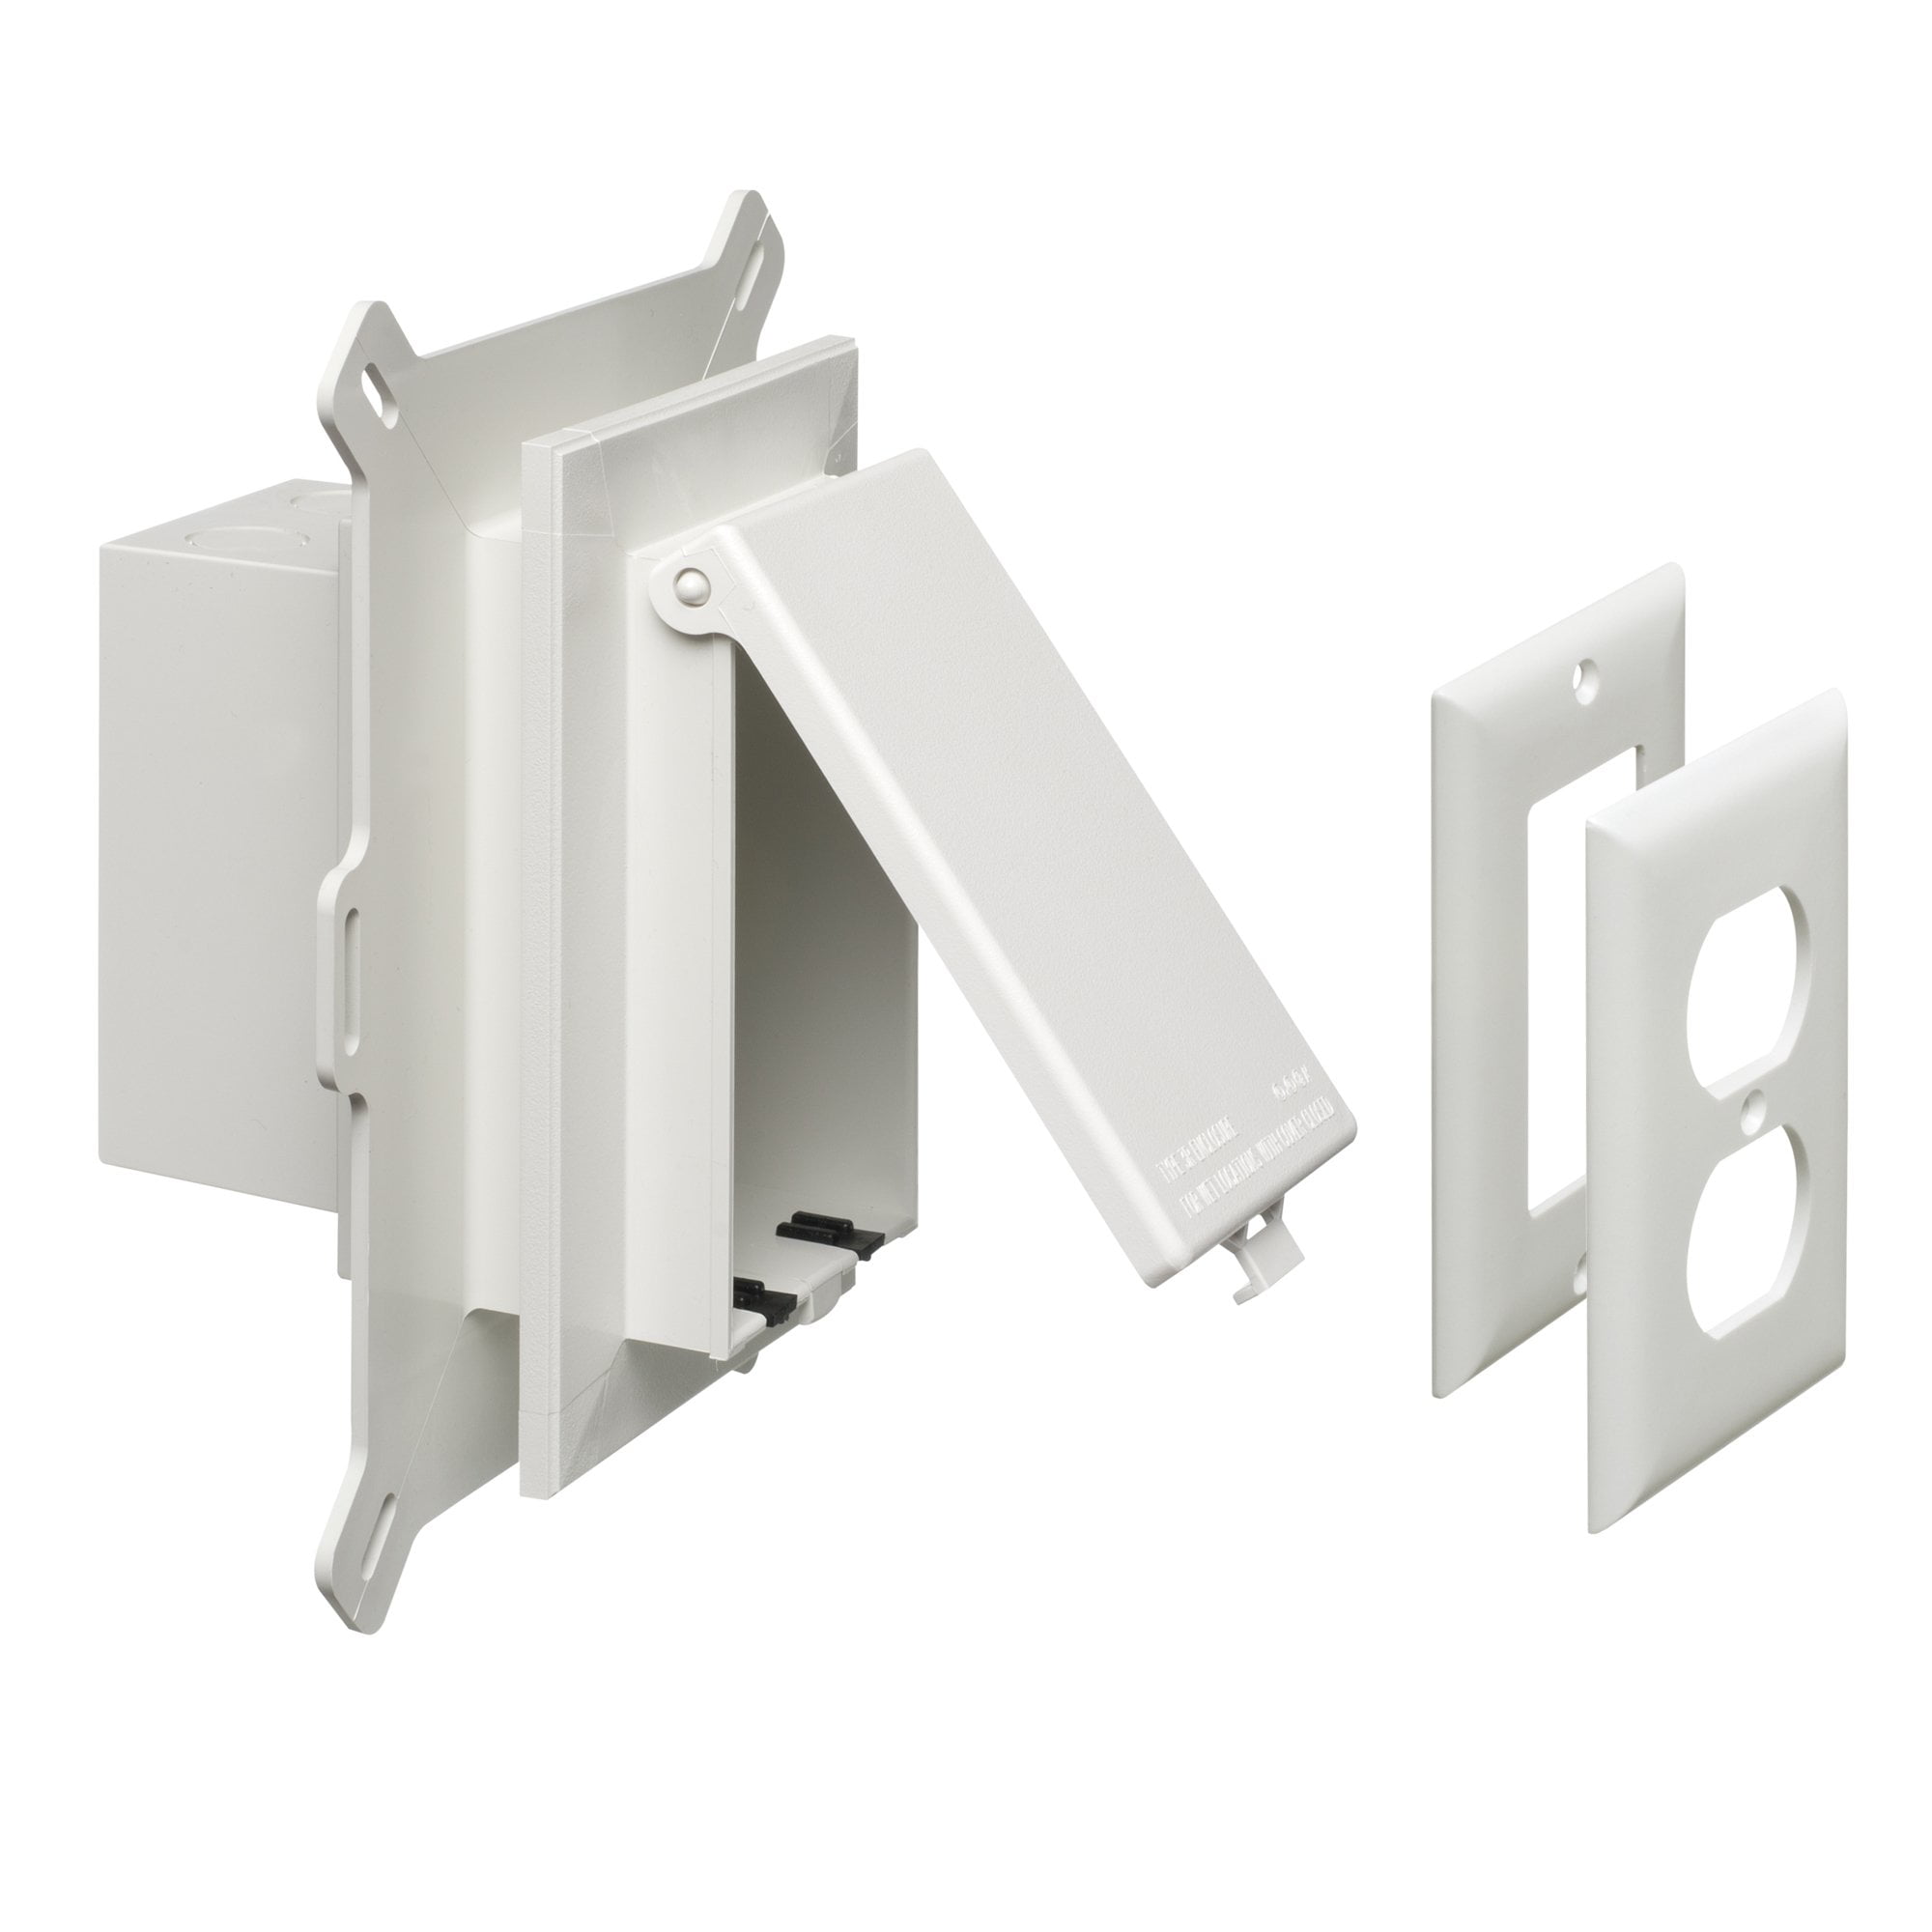 Arlington DBVS1W1 Low Profile IN BOX Recessed Outlet Box Wall Plate Kit for New Vinyl Siding